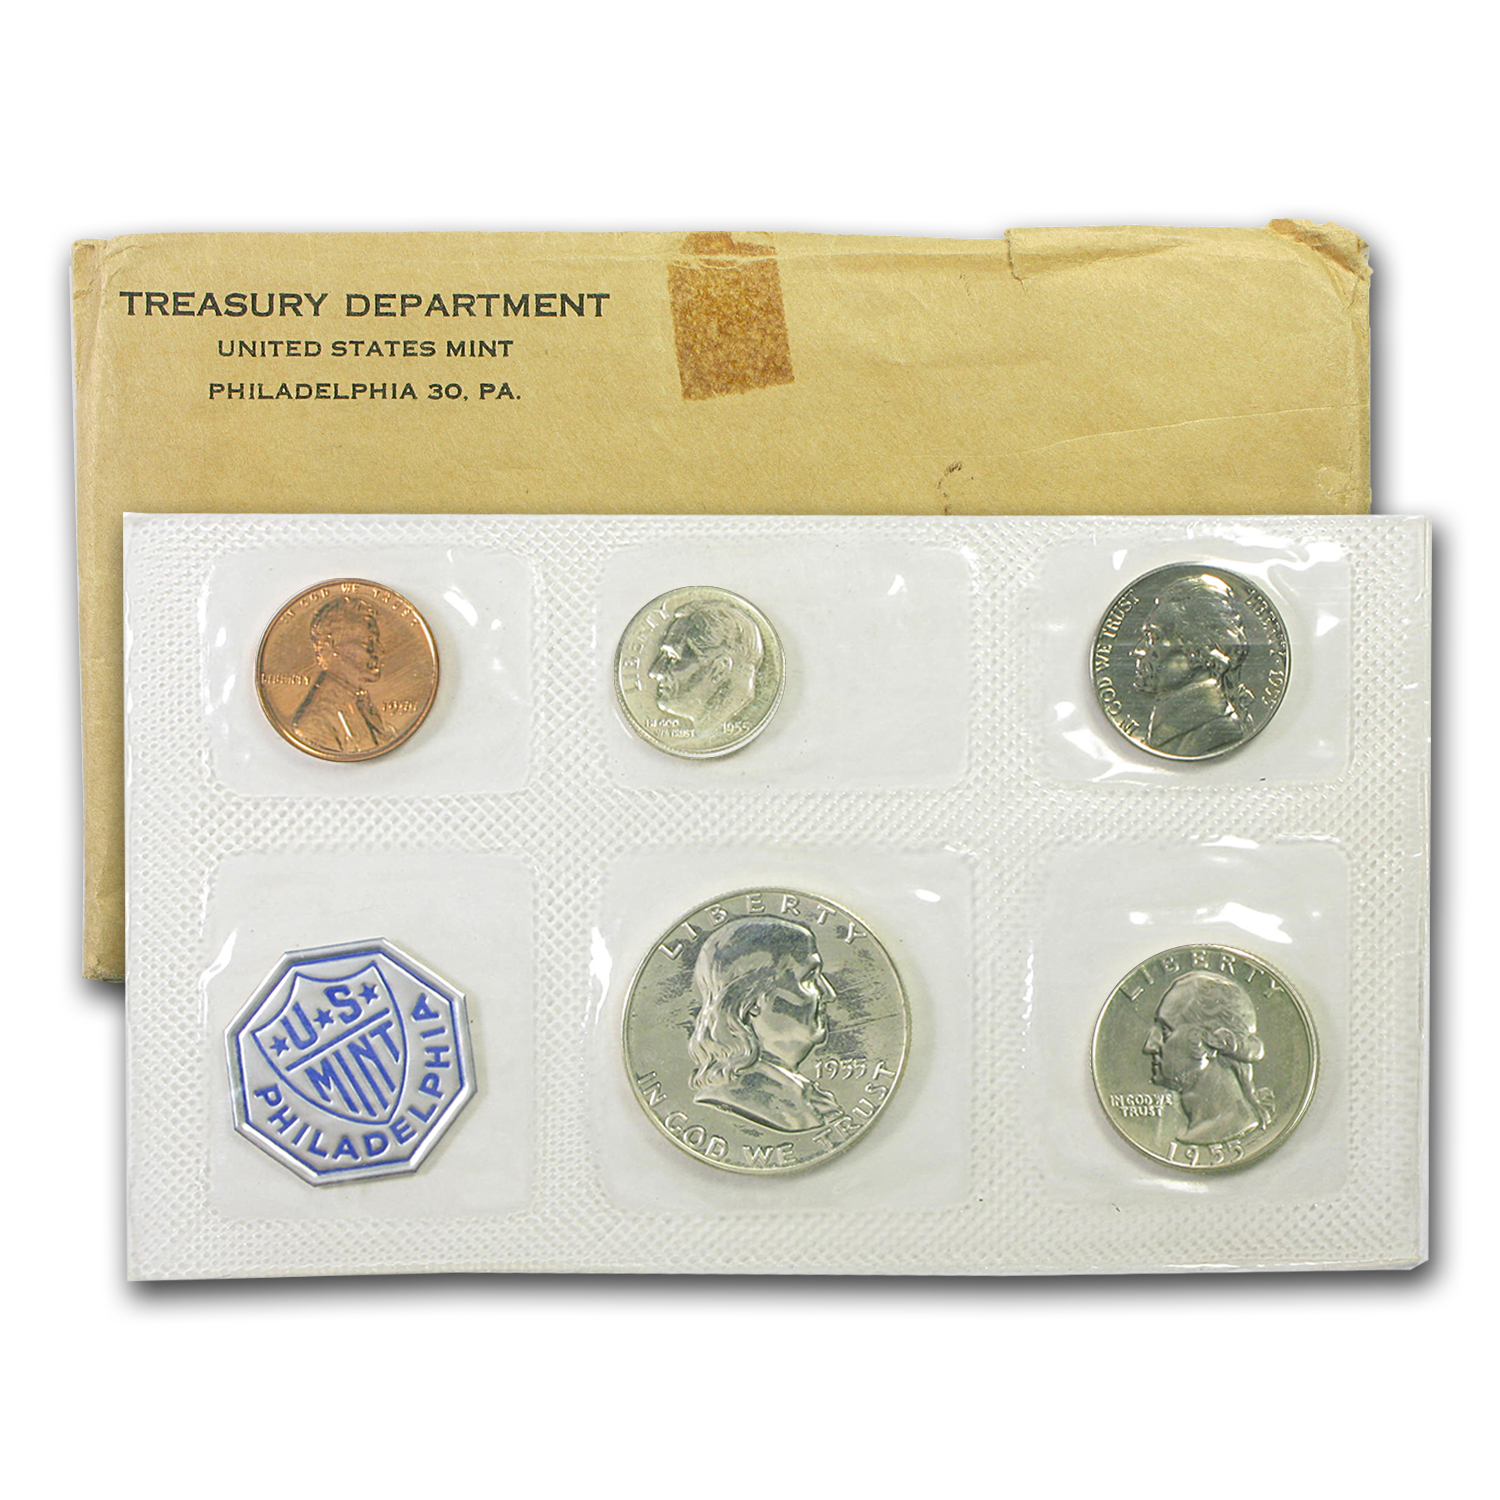 Mint Sealed in a flat cello. The Coins are U.S 1956 U.S PROOF SET 